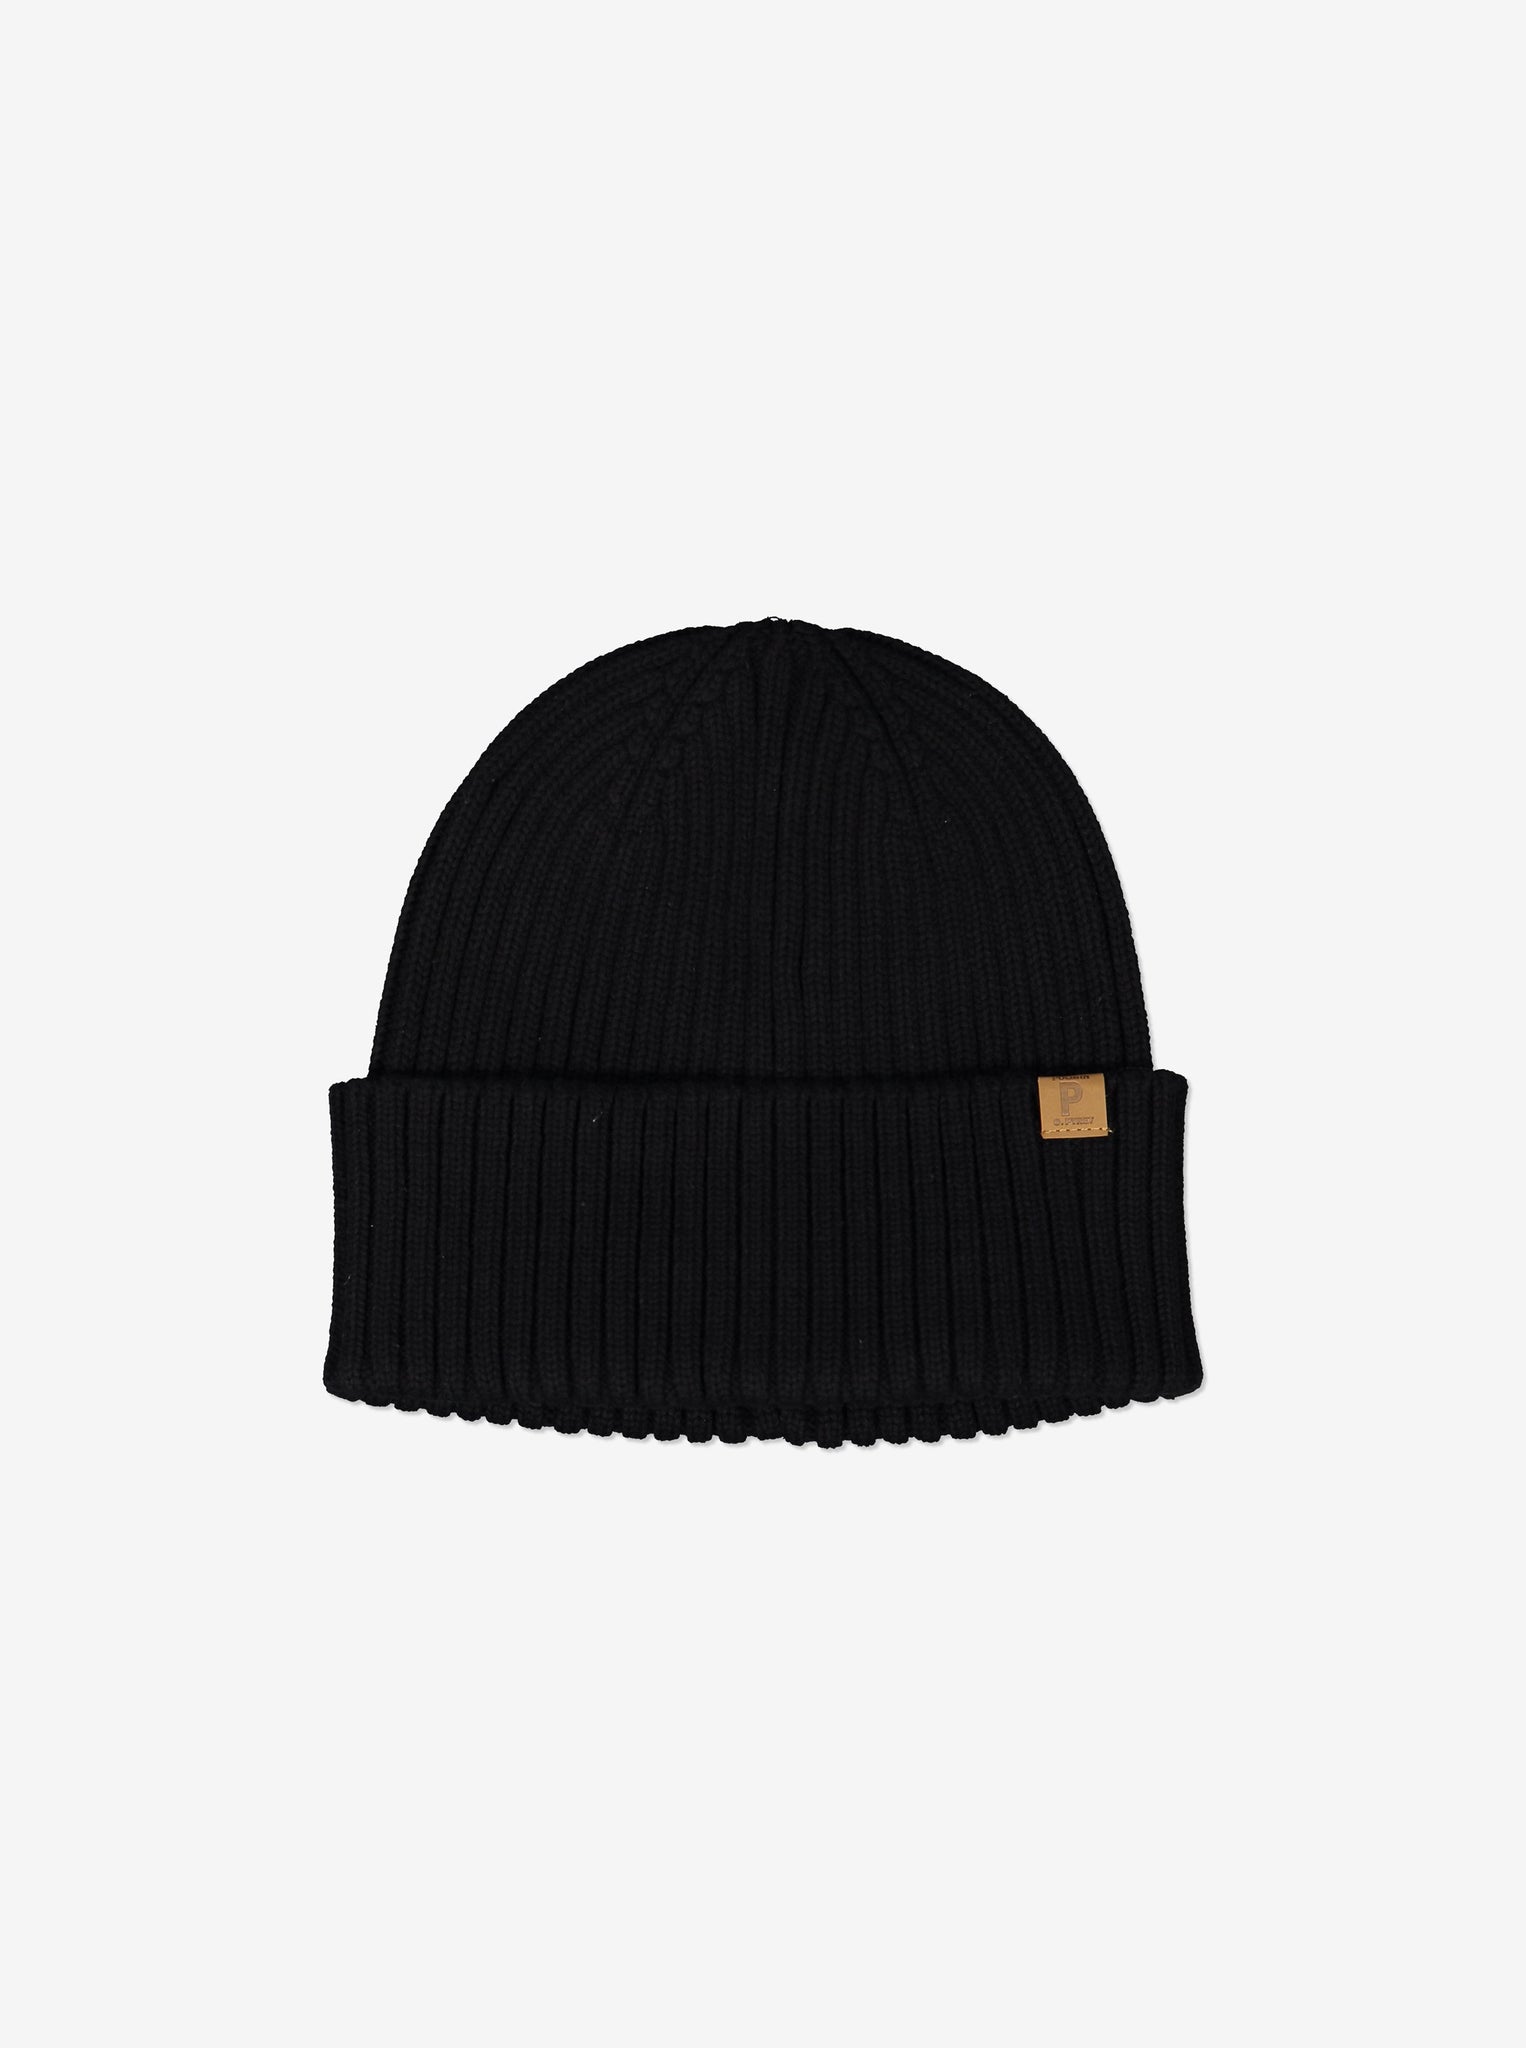 Black Knitted Kids Hat, warm and comfortable organic cotton, ethical and long lasting kids clothes polarn o. pyret